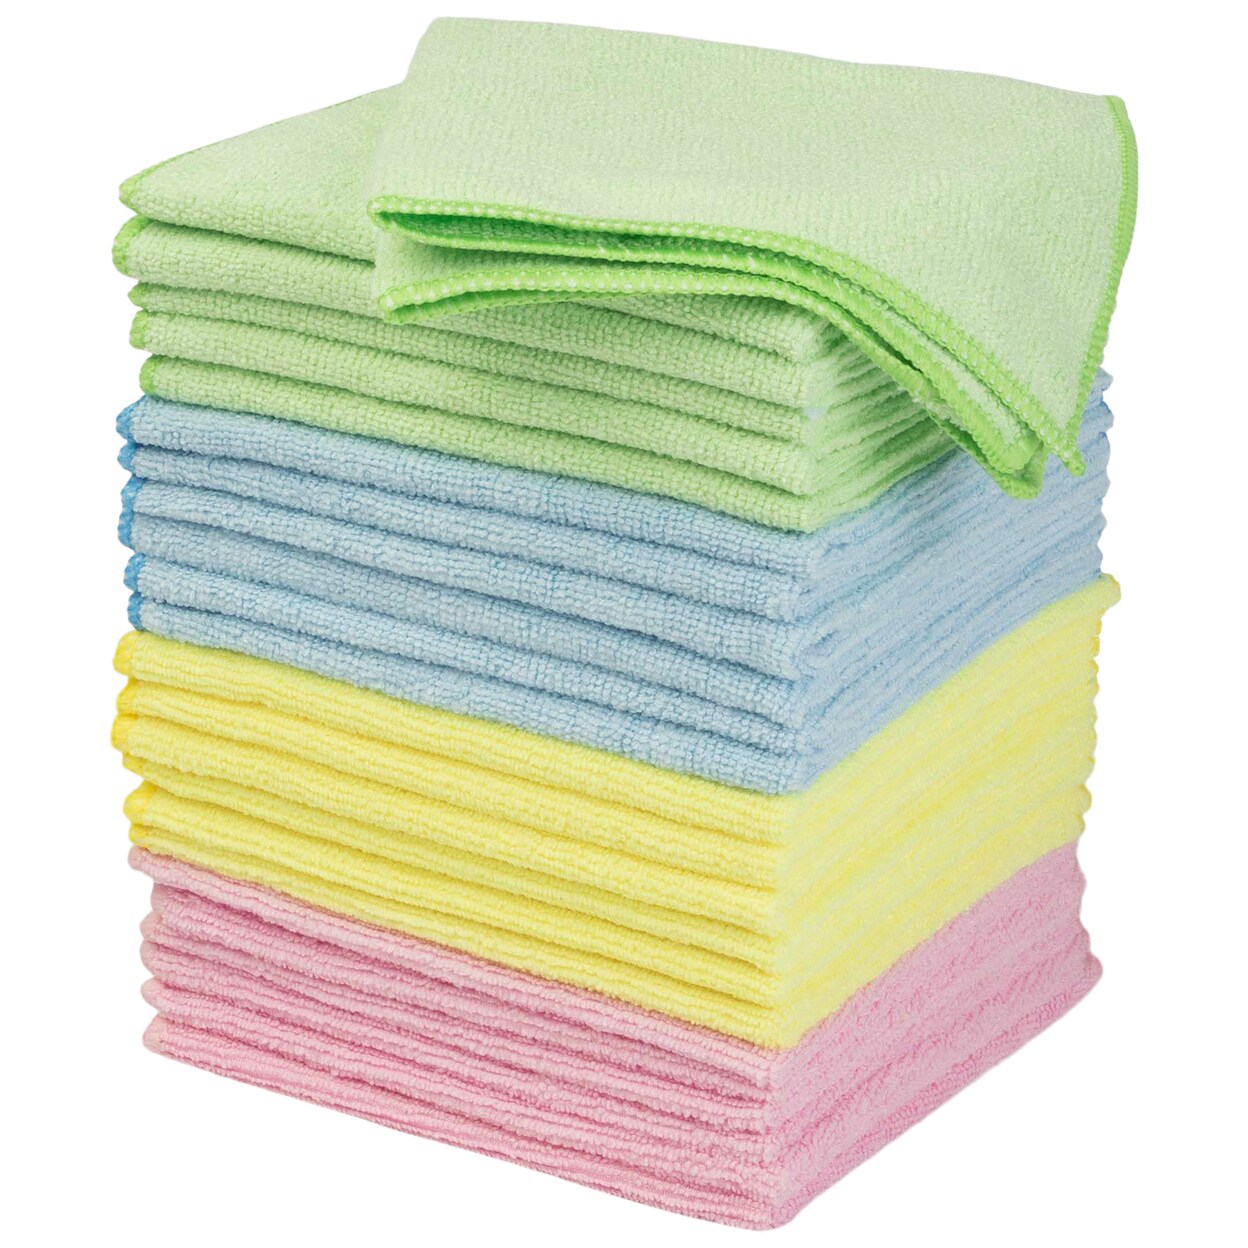 Stalwart Microfiber Cleaning Cloth Set 24pack Microfiber Towels 12.6in Cleaning Rags